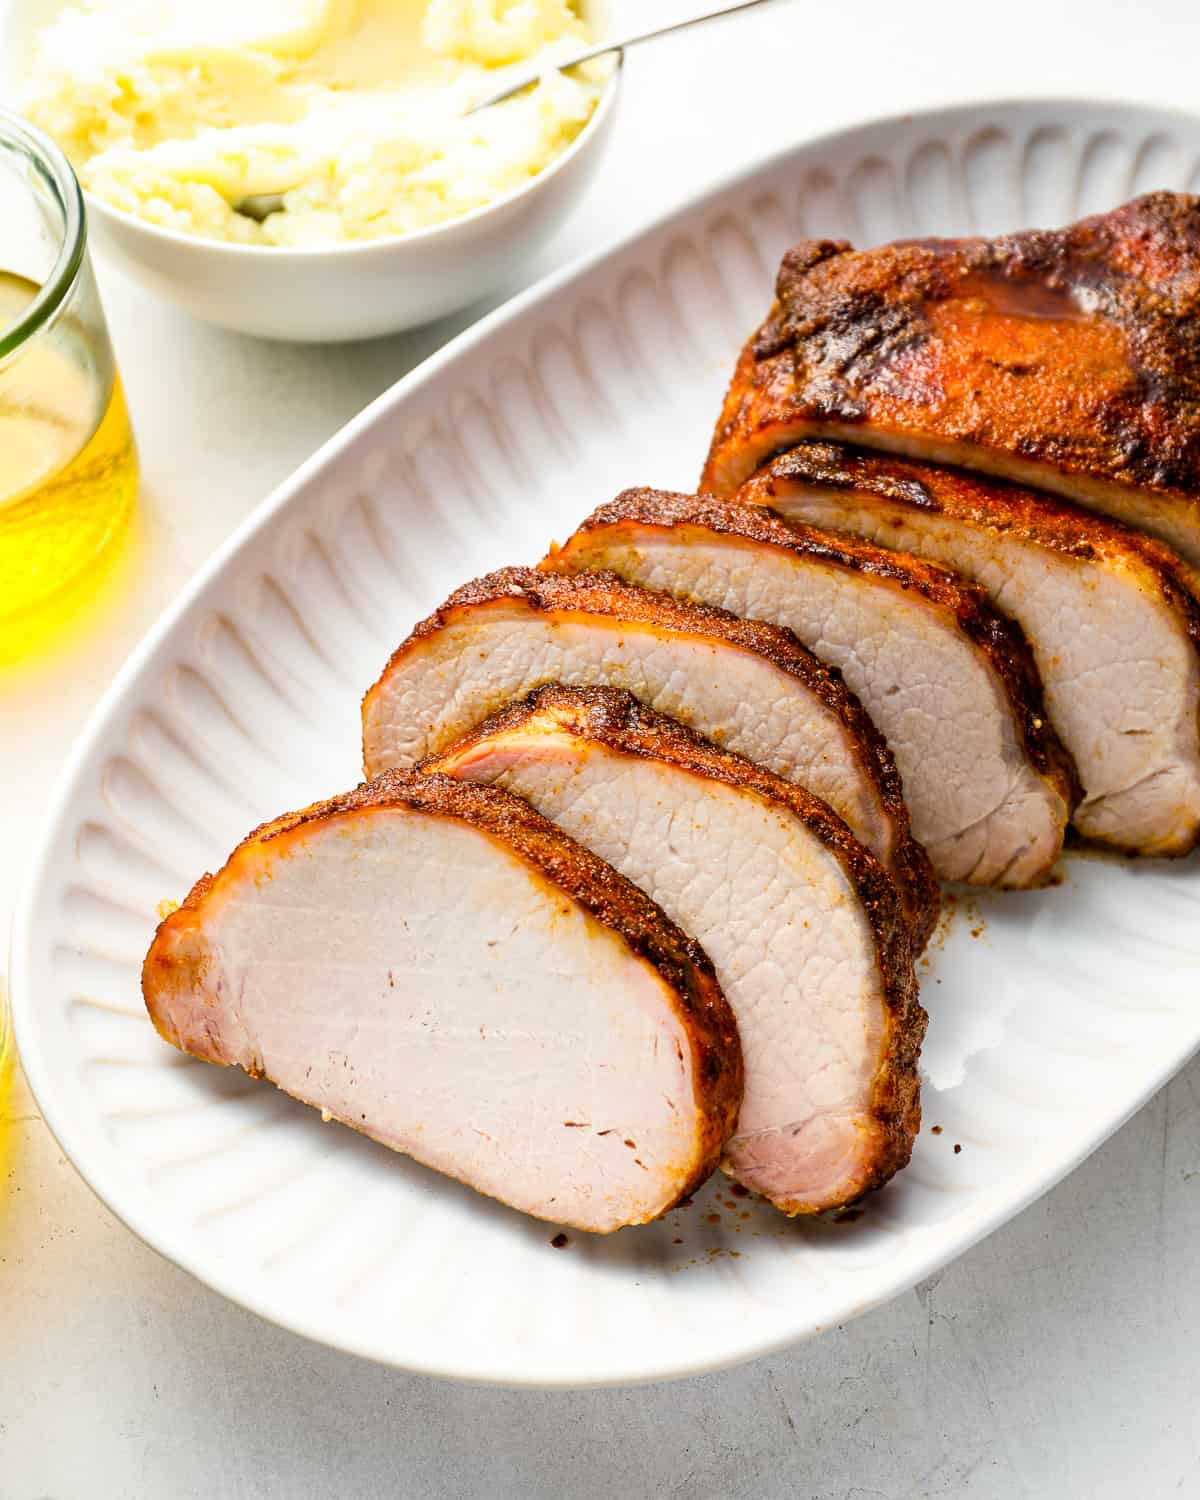 three-quarters view of a sliced smoked pork loin on a white oval serving platter.